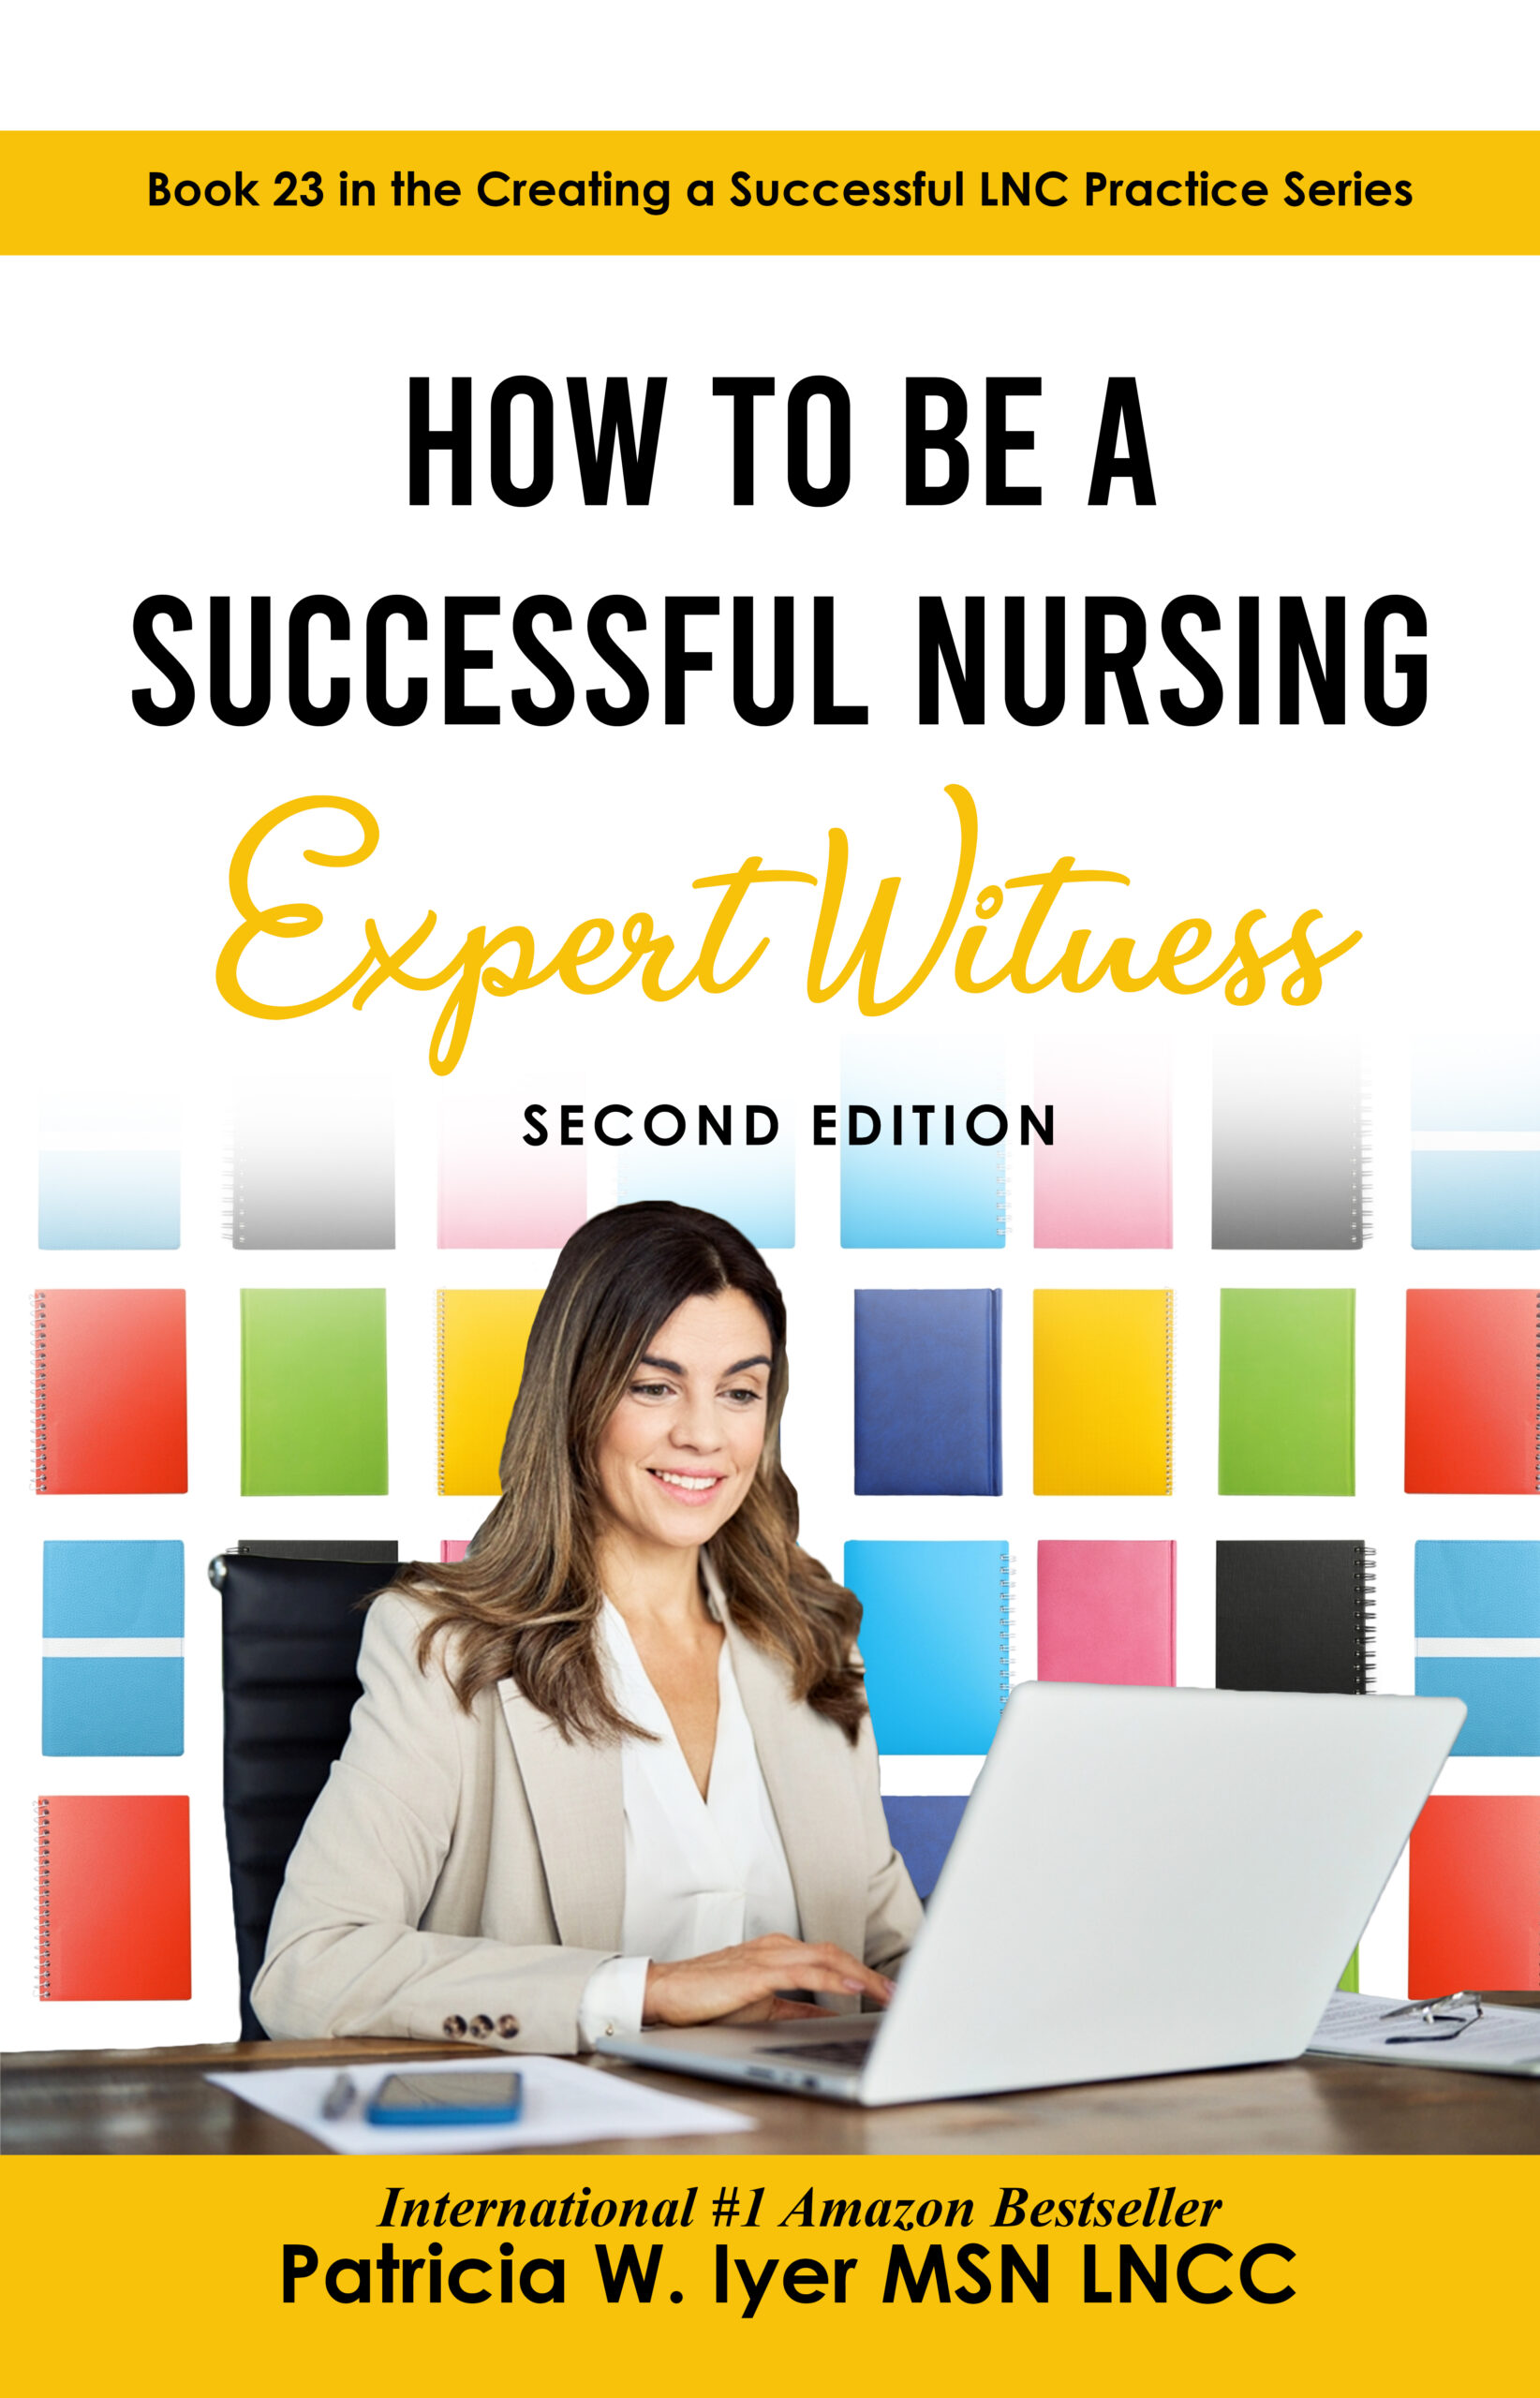 How To Be A Successful Nursing Expert witness 2nd Edition